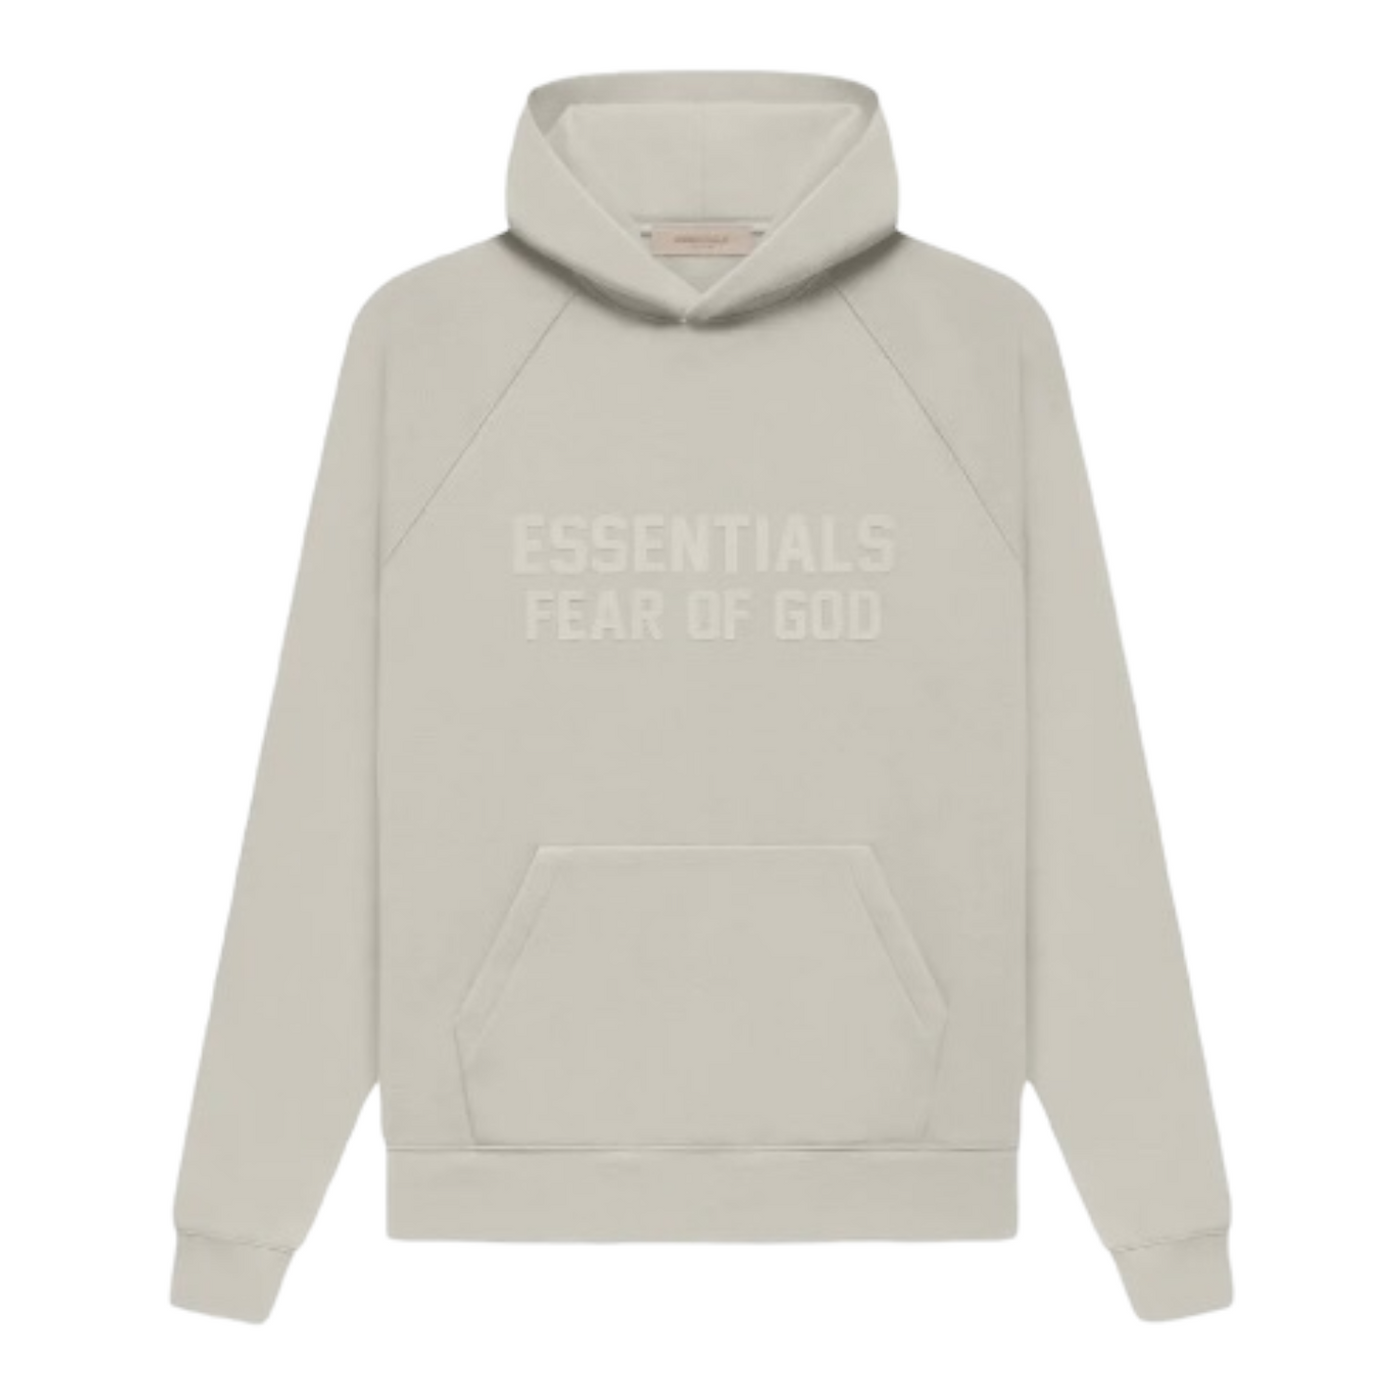 FEAR OF GOD ESSENTIALS SS22 PULLOVER HOODIE SMOKE